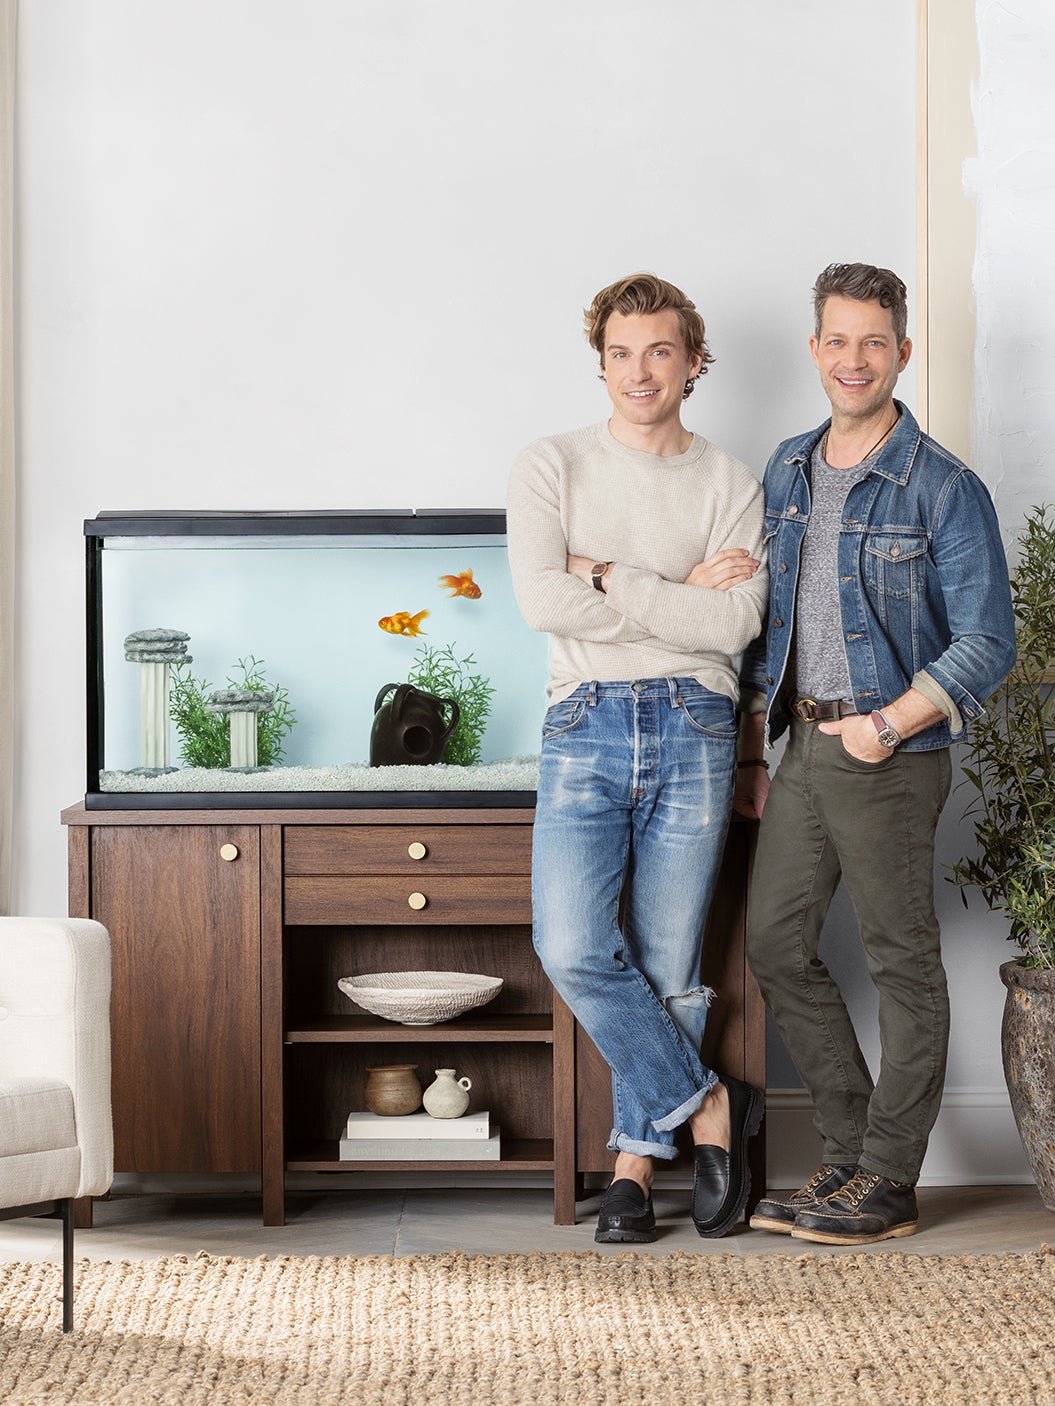 Nate Berkus and Jeremiah Brent Just Designed a Seriously Stylish Sofa…for a Hamster